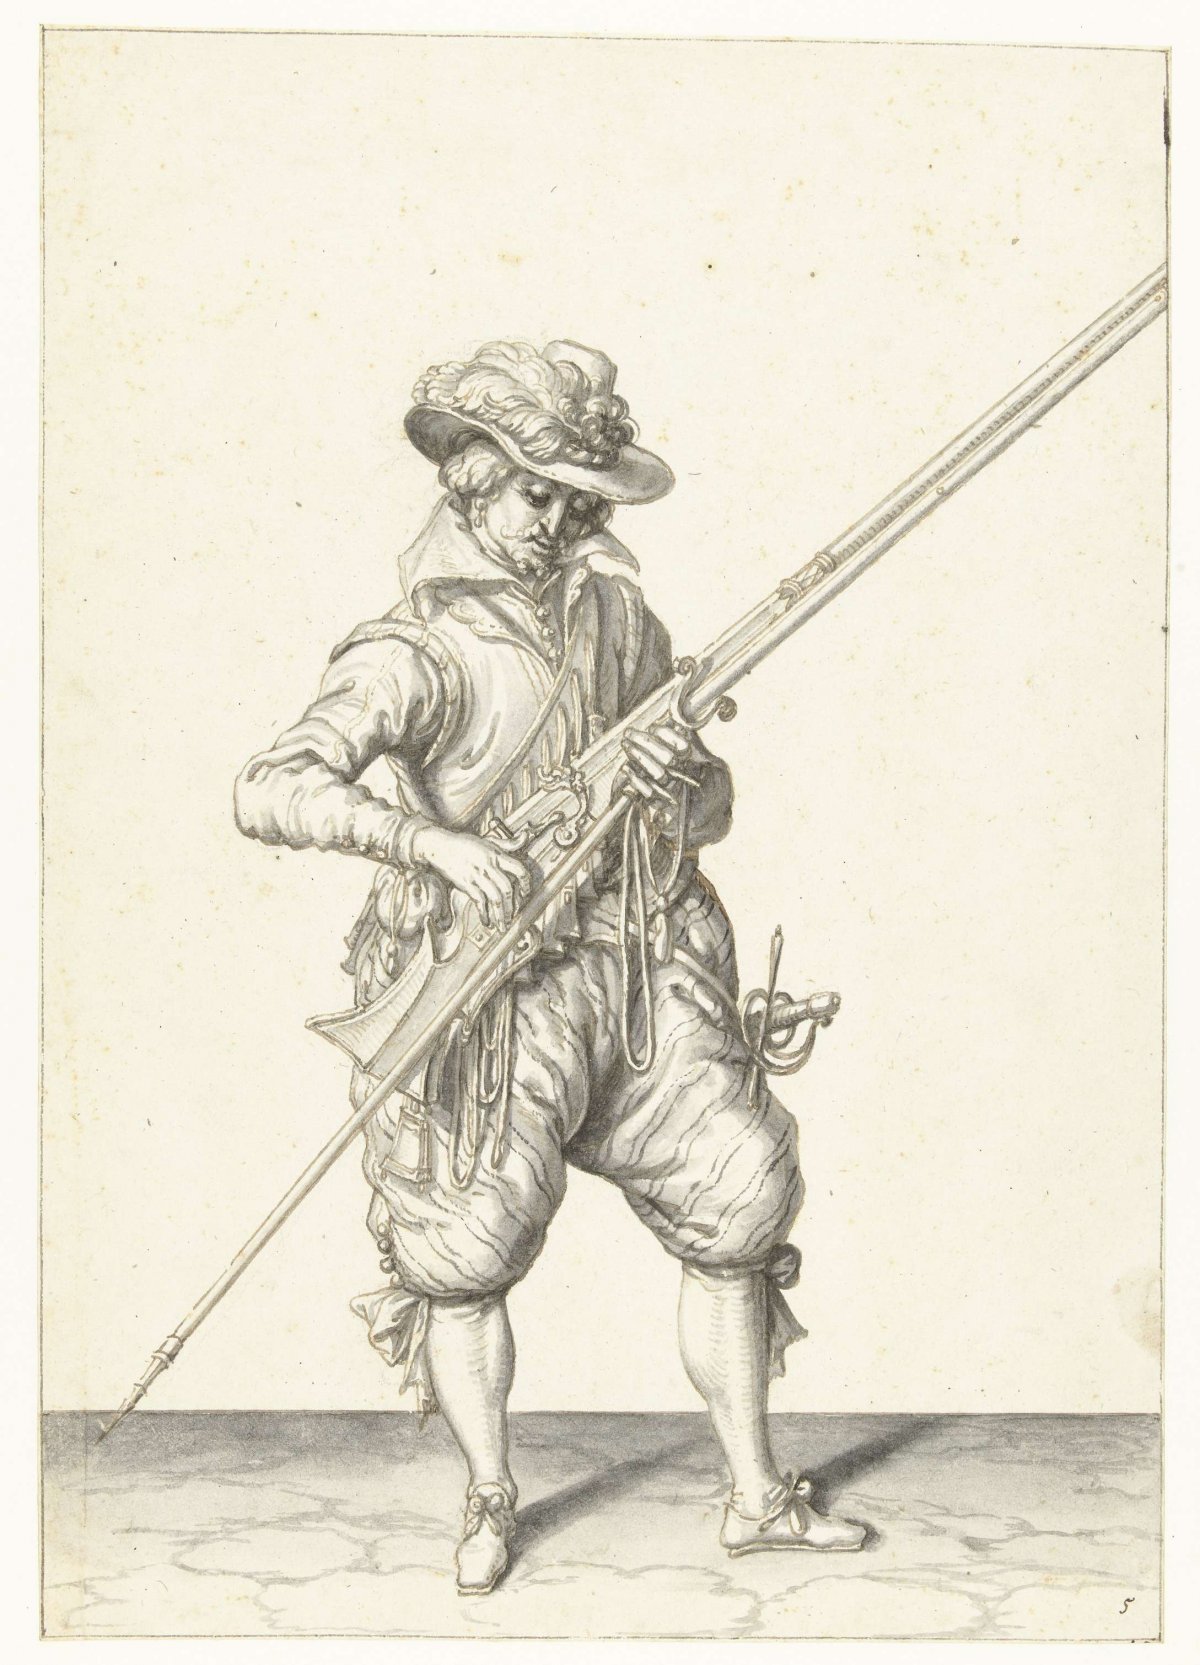 Soldier holding his musket with his left hand by his right side, Jacques de Gheyn (II), 1596 - 1606